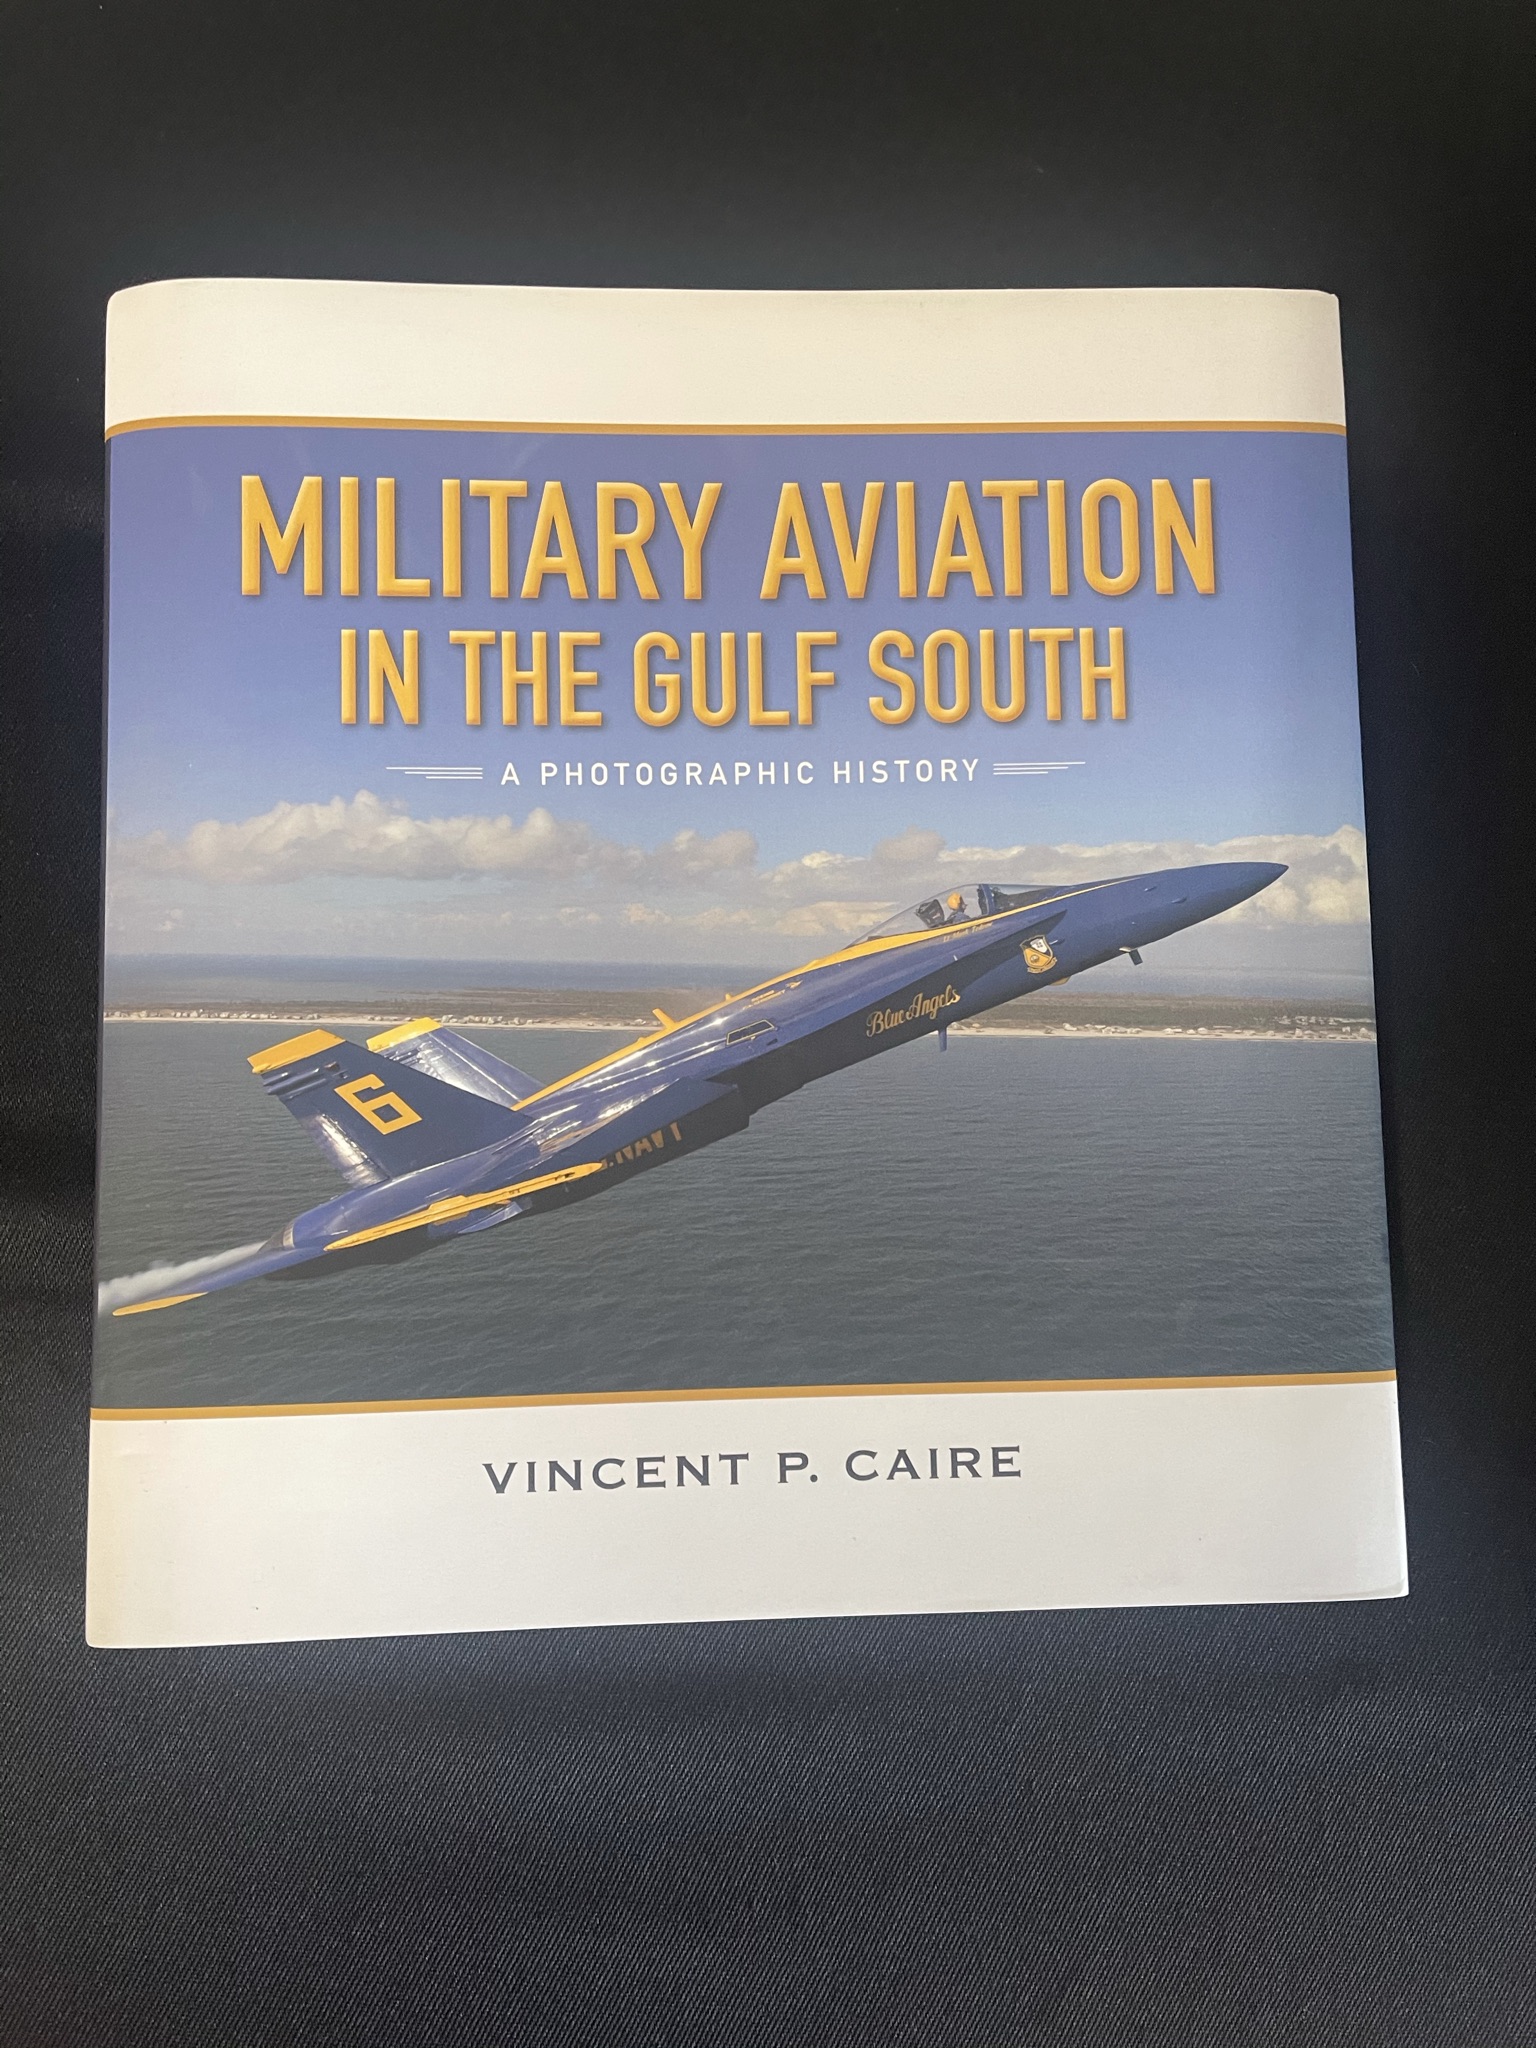 Featured image for “Military Aviation in the Gulf”